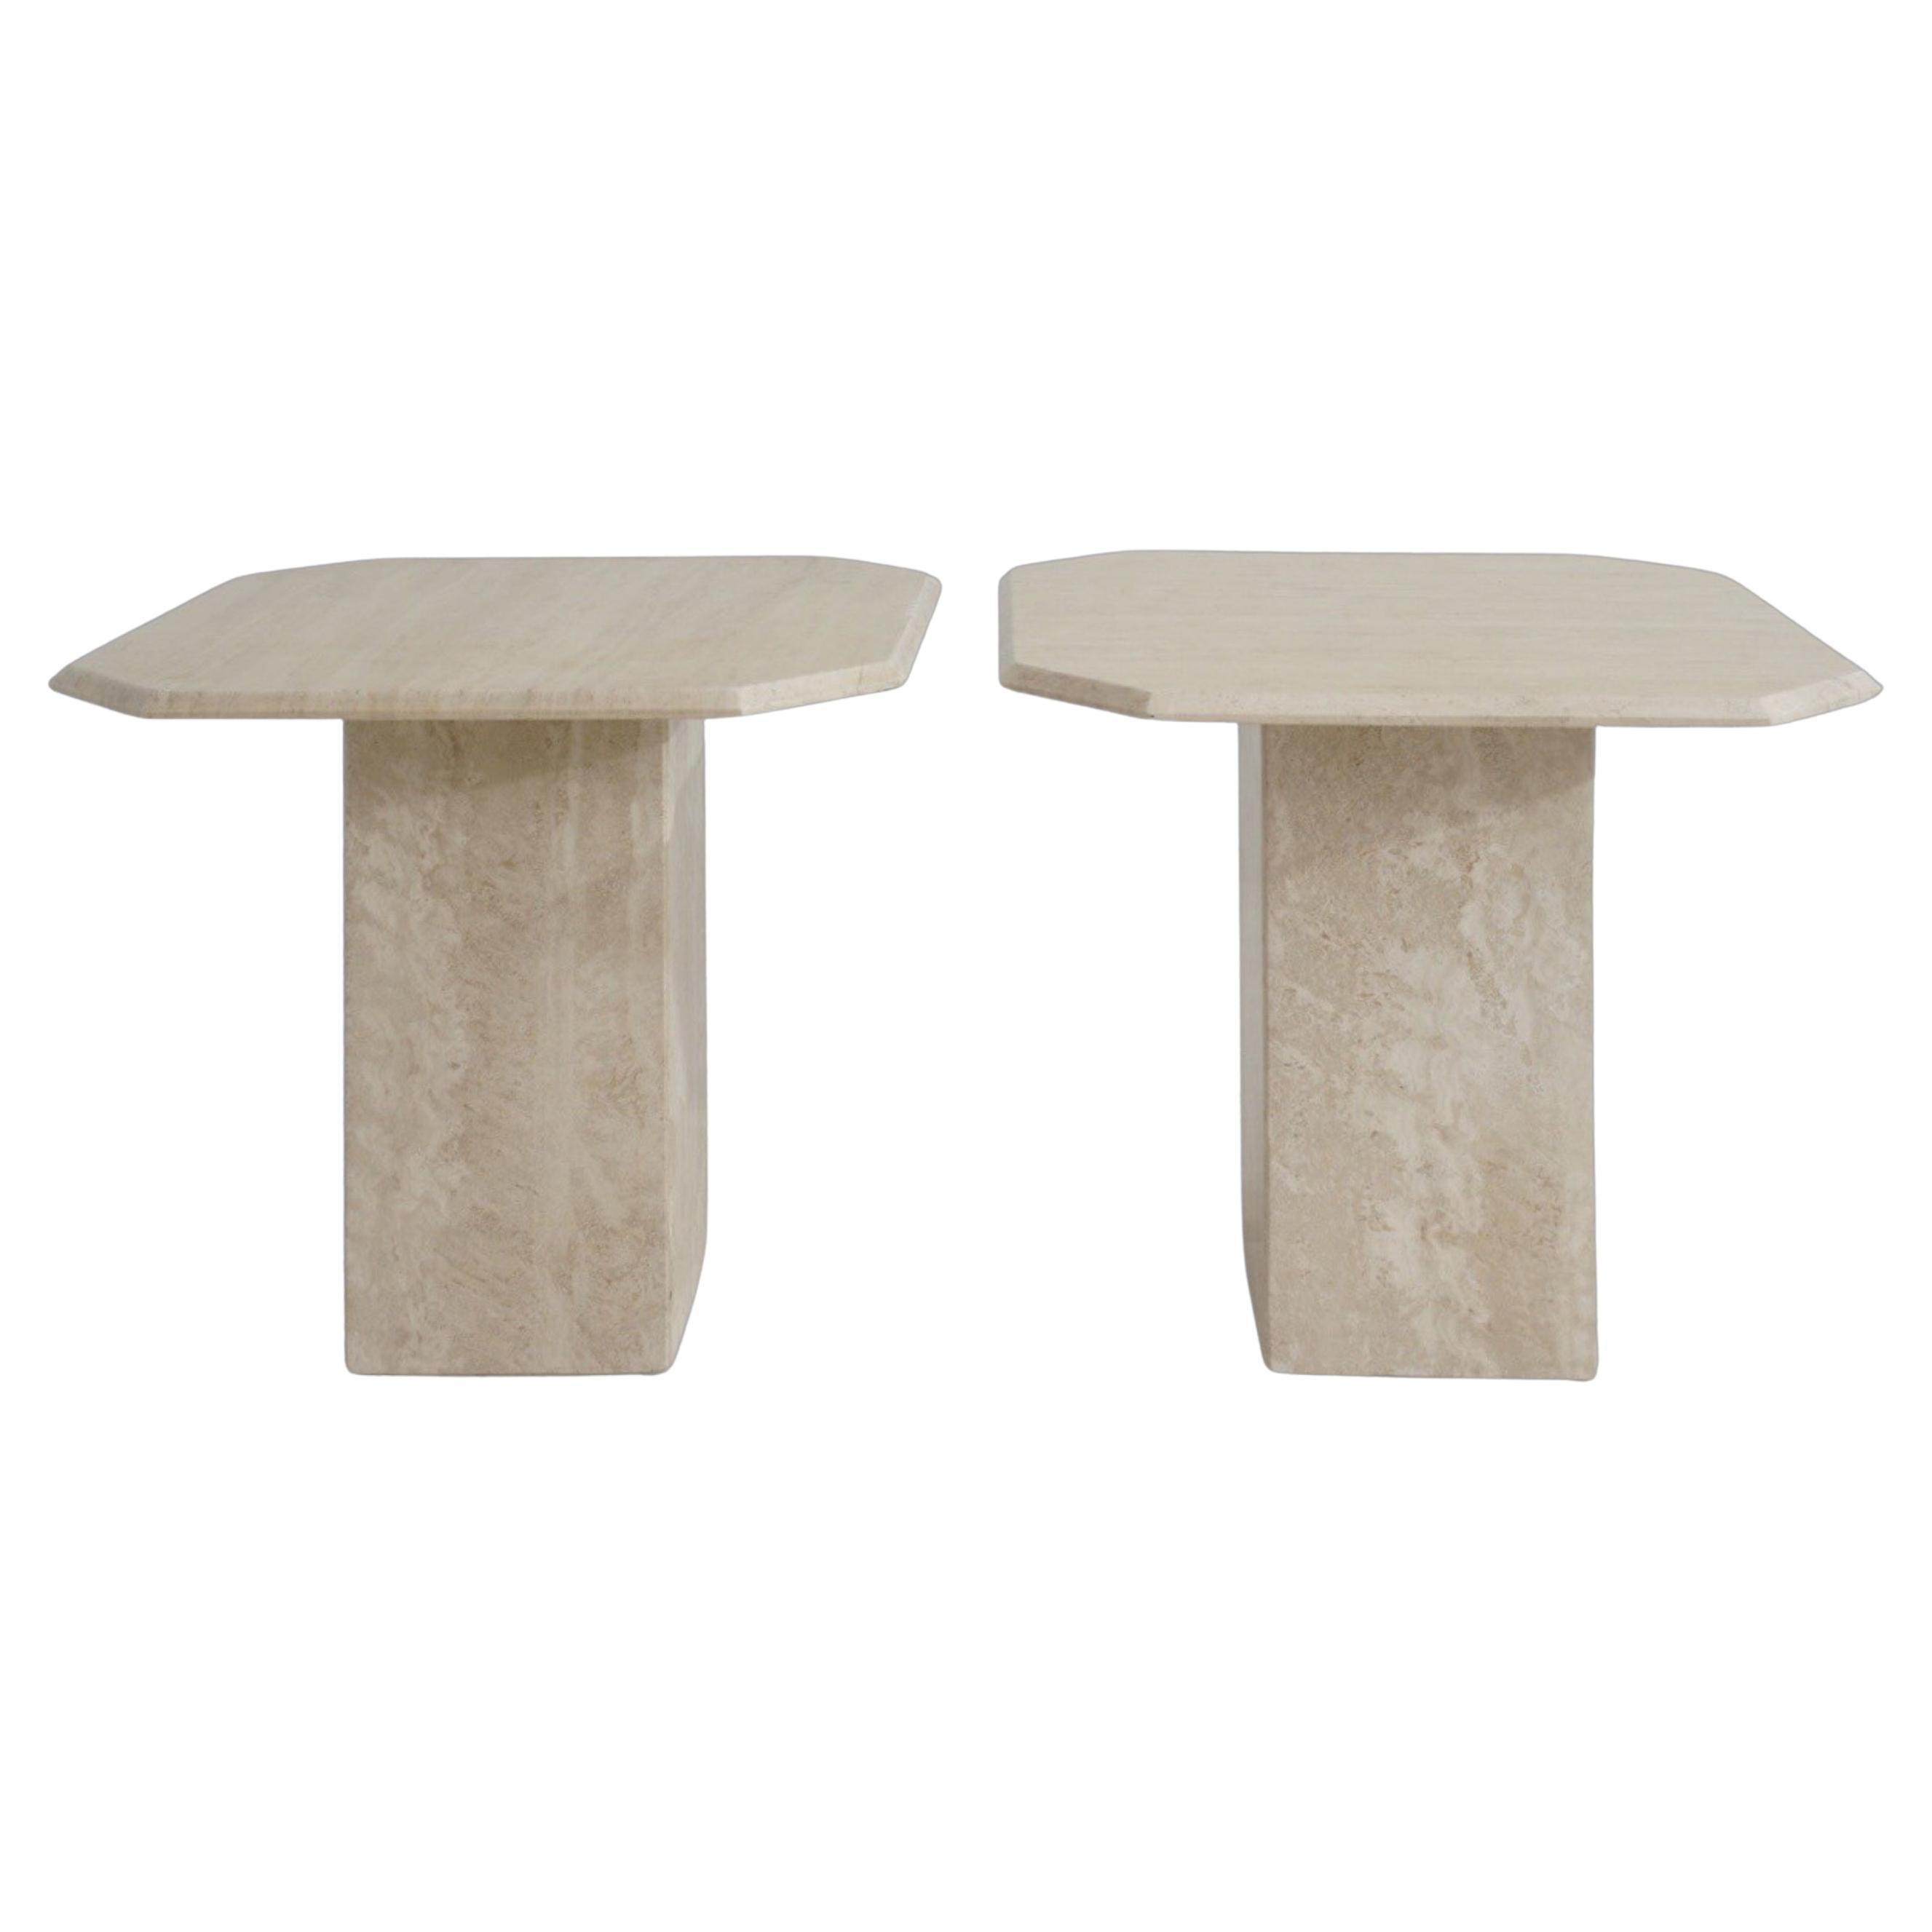 Pair of Travertine Pedestal Side Tables, 1980s For Sale